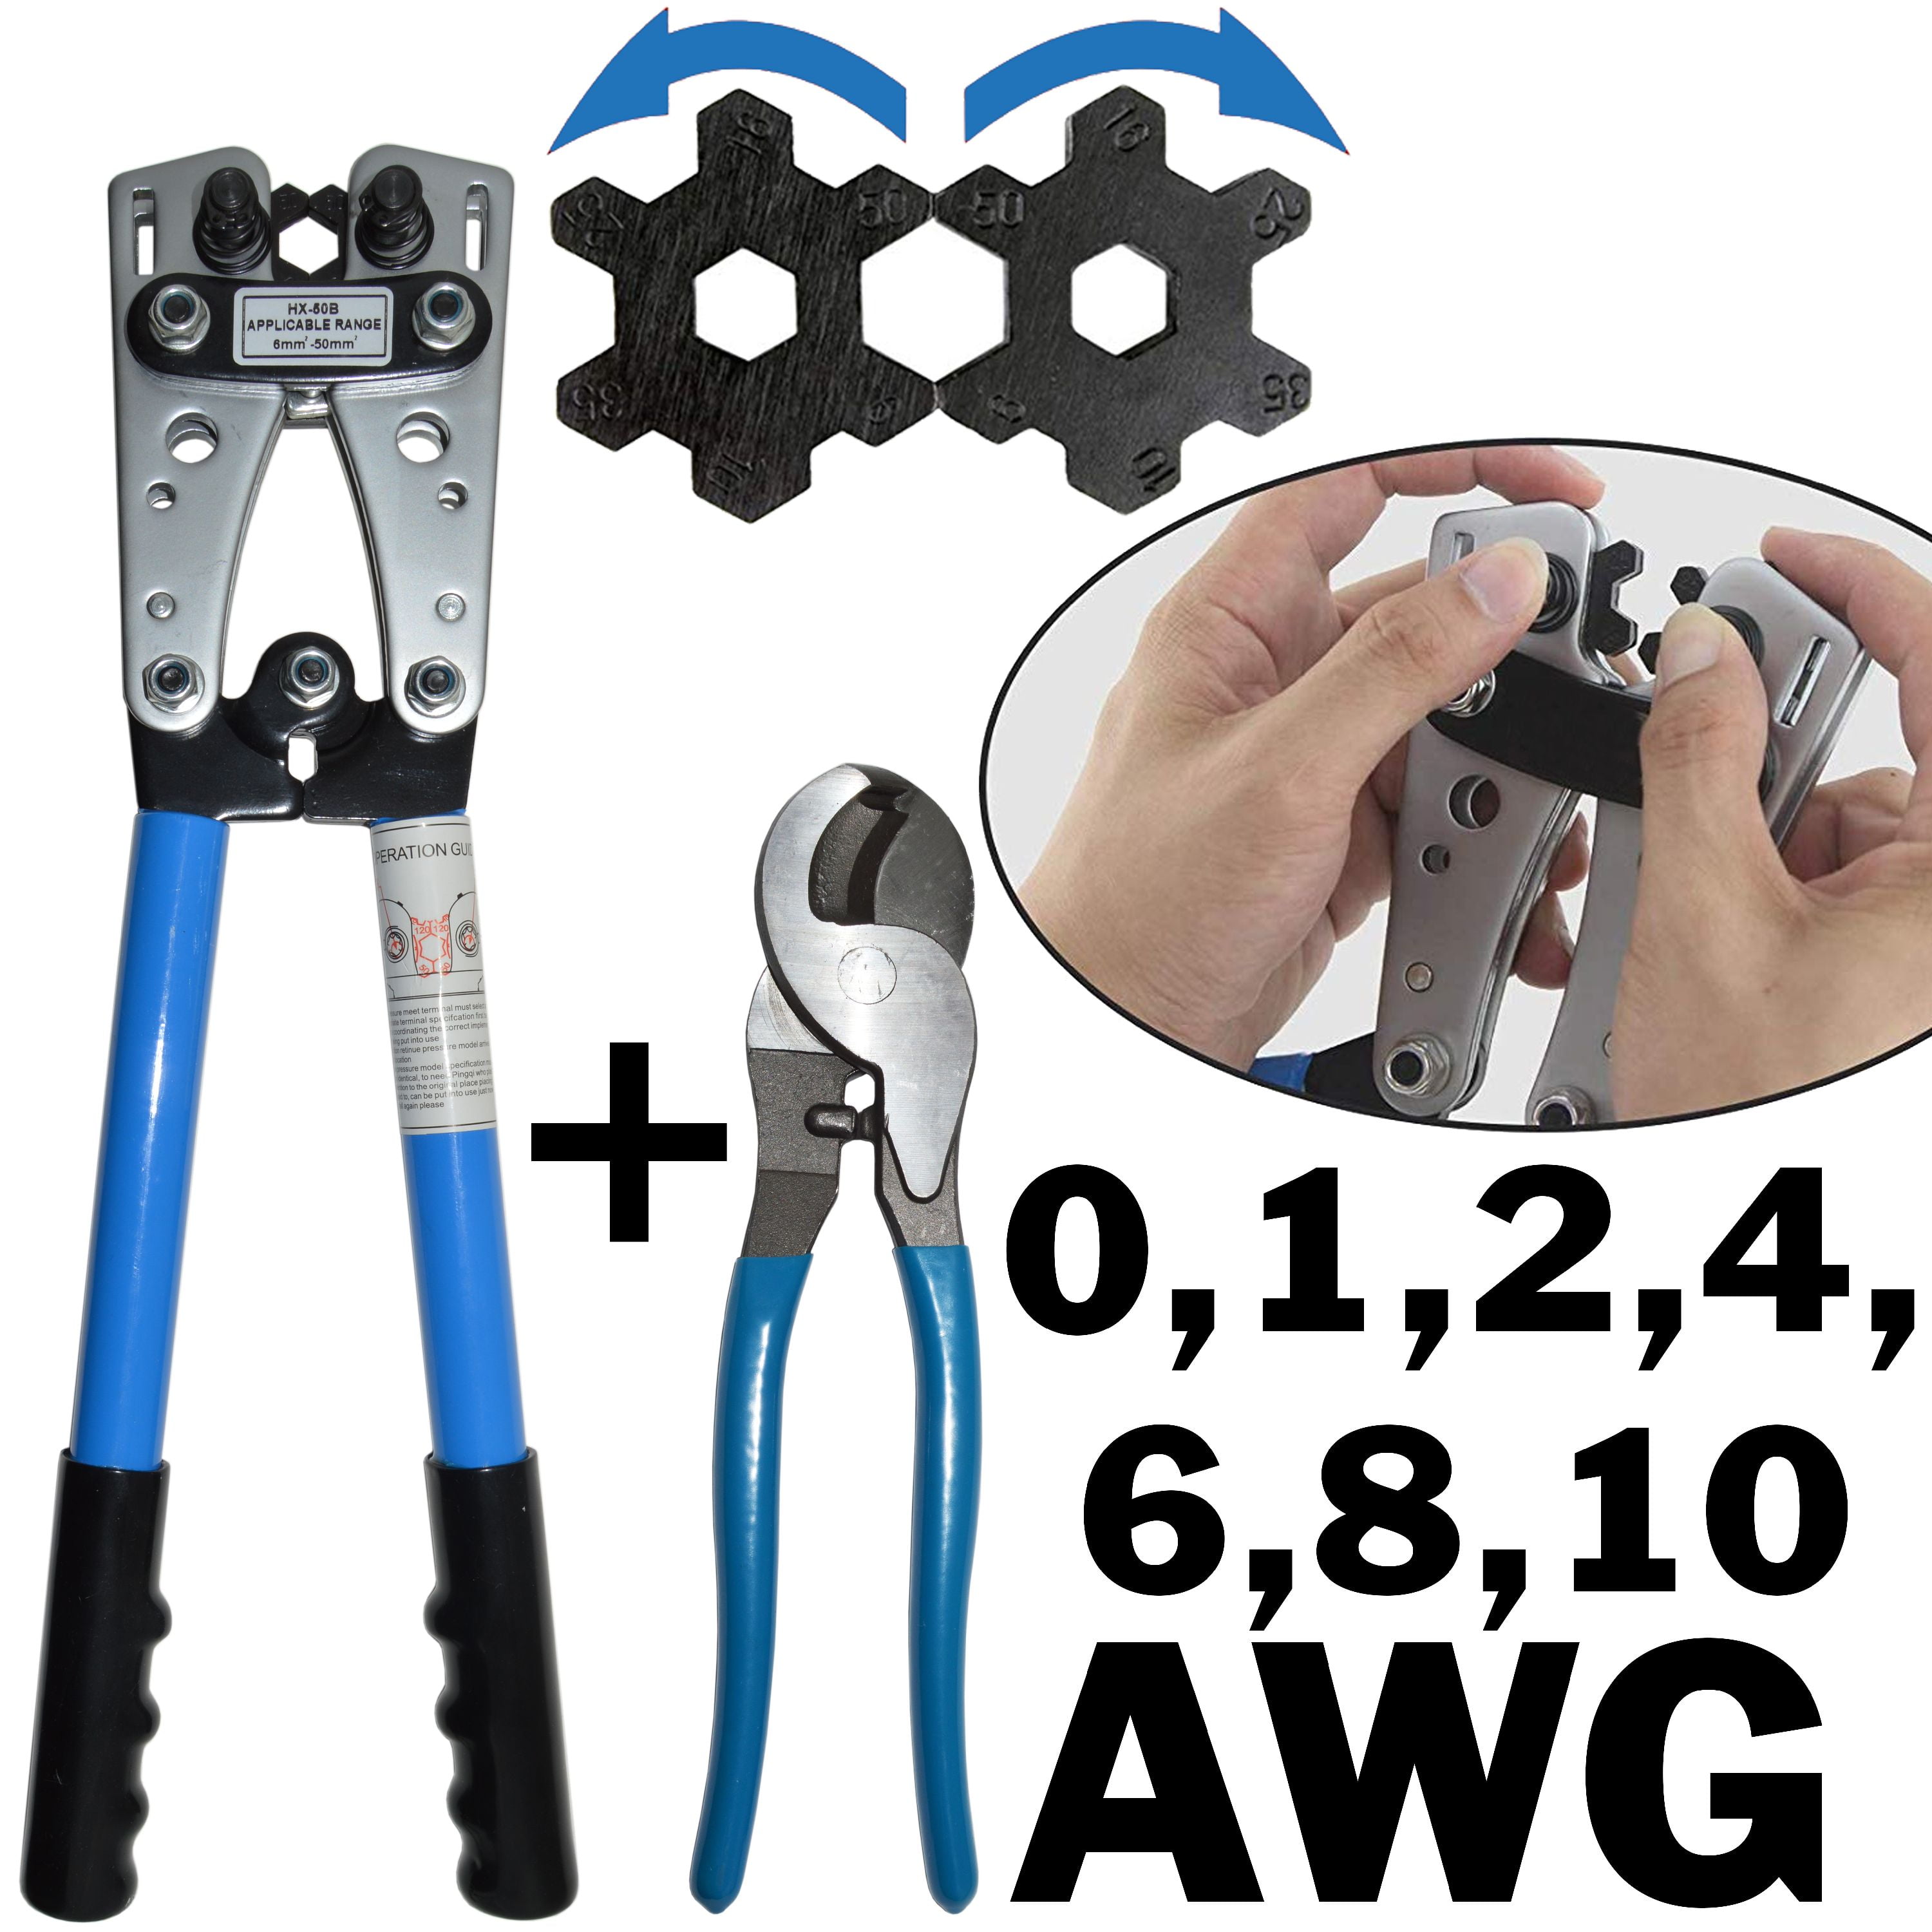 8" CABLE WIRE CUTTERS Crimping Snipping Stripper Electrician Terminal Pliers 